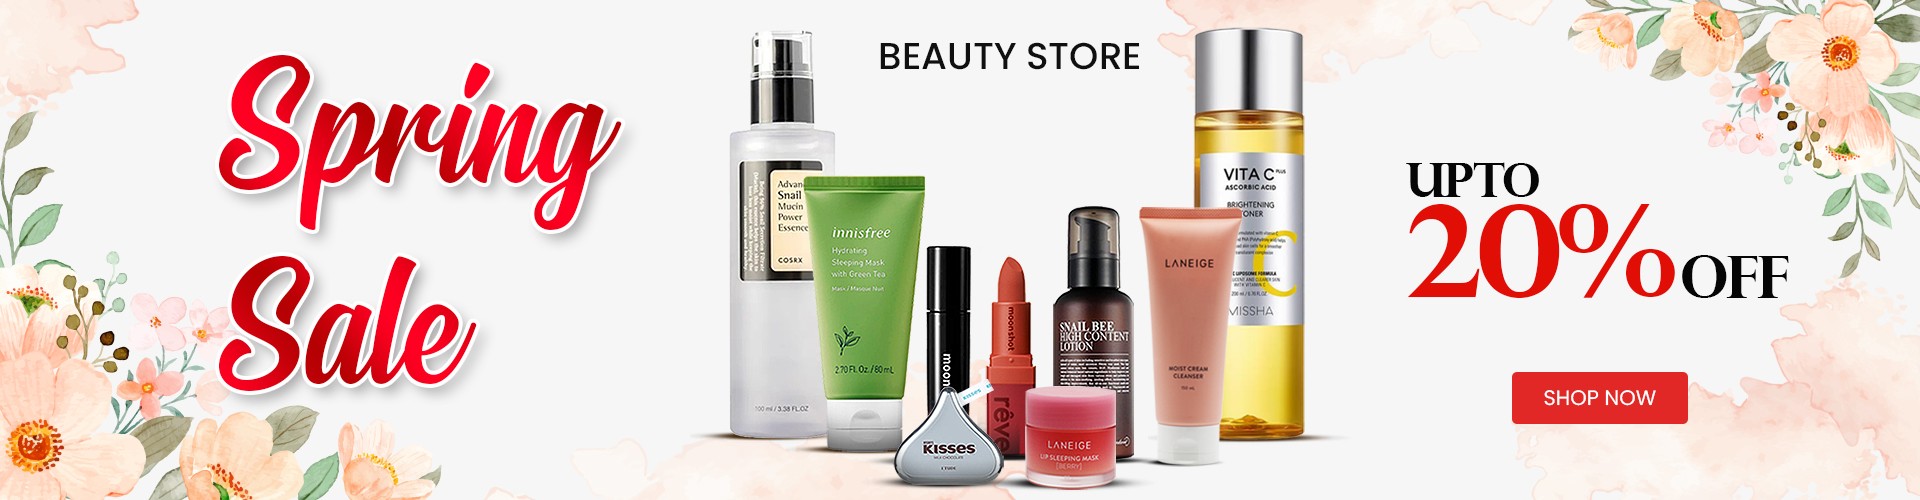 Spring sale upto 20% off on beauty store